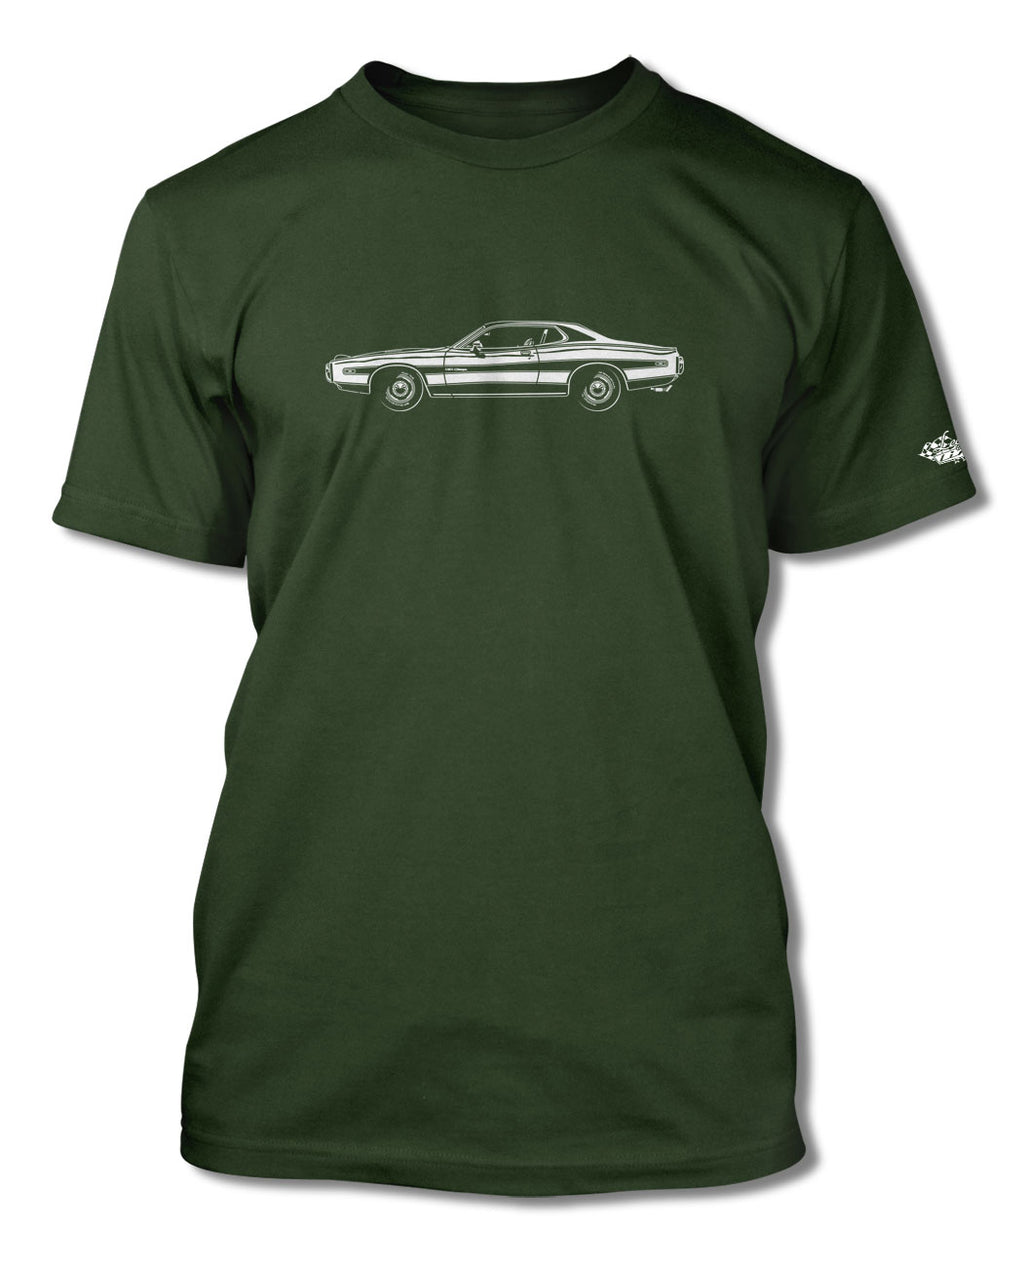 1973 Dodge Charger Rallye 440 Magnum with Stripes Coupe T-Shirt - Men - Side View